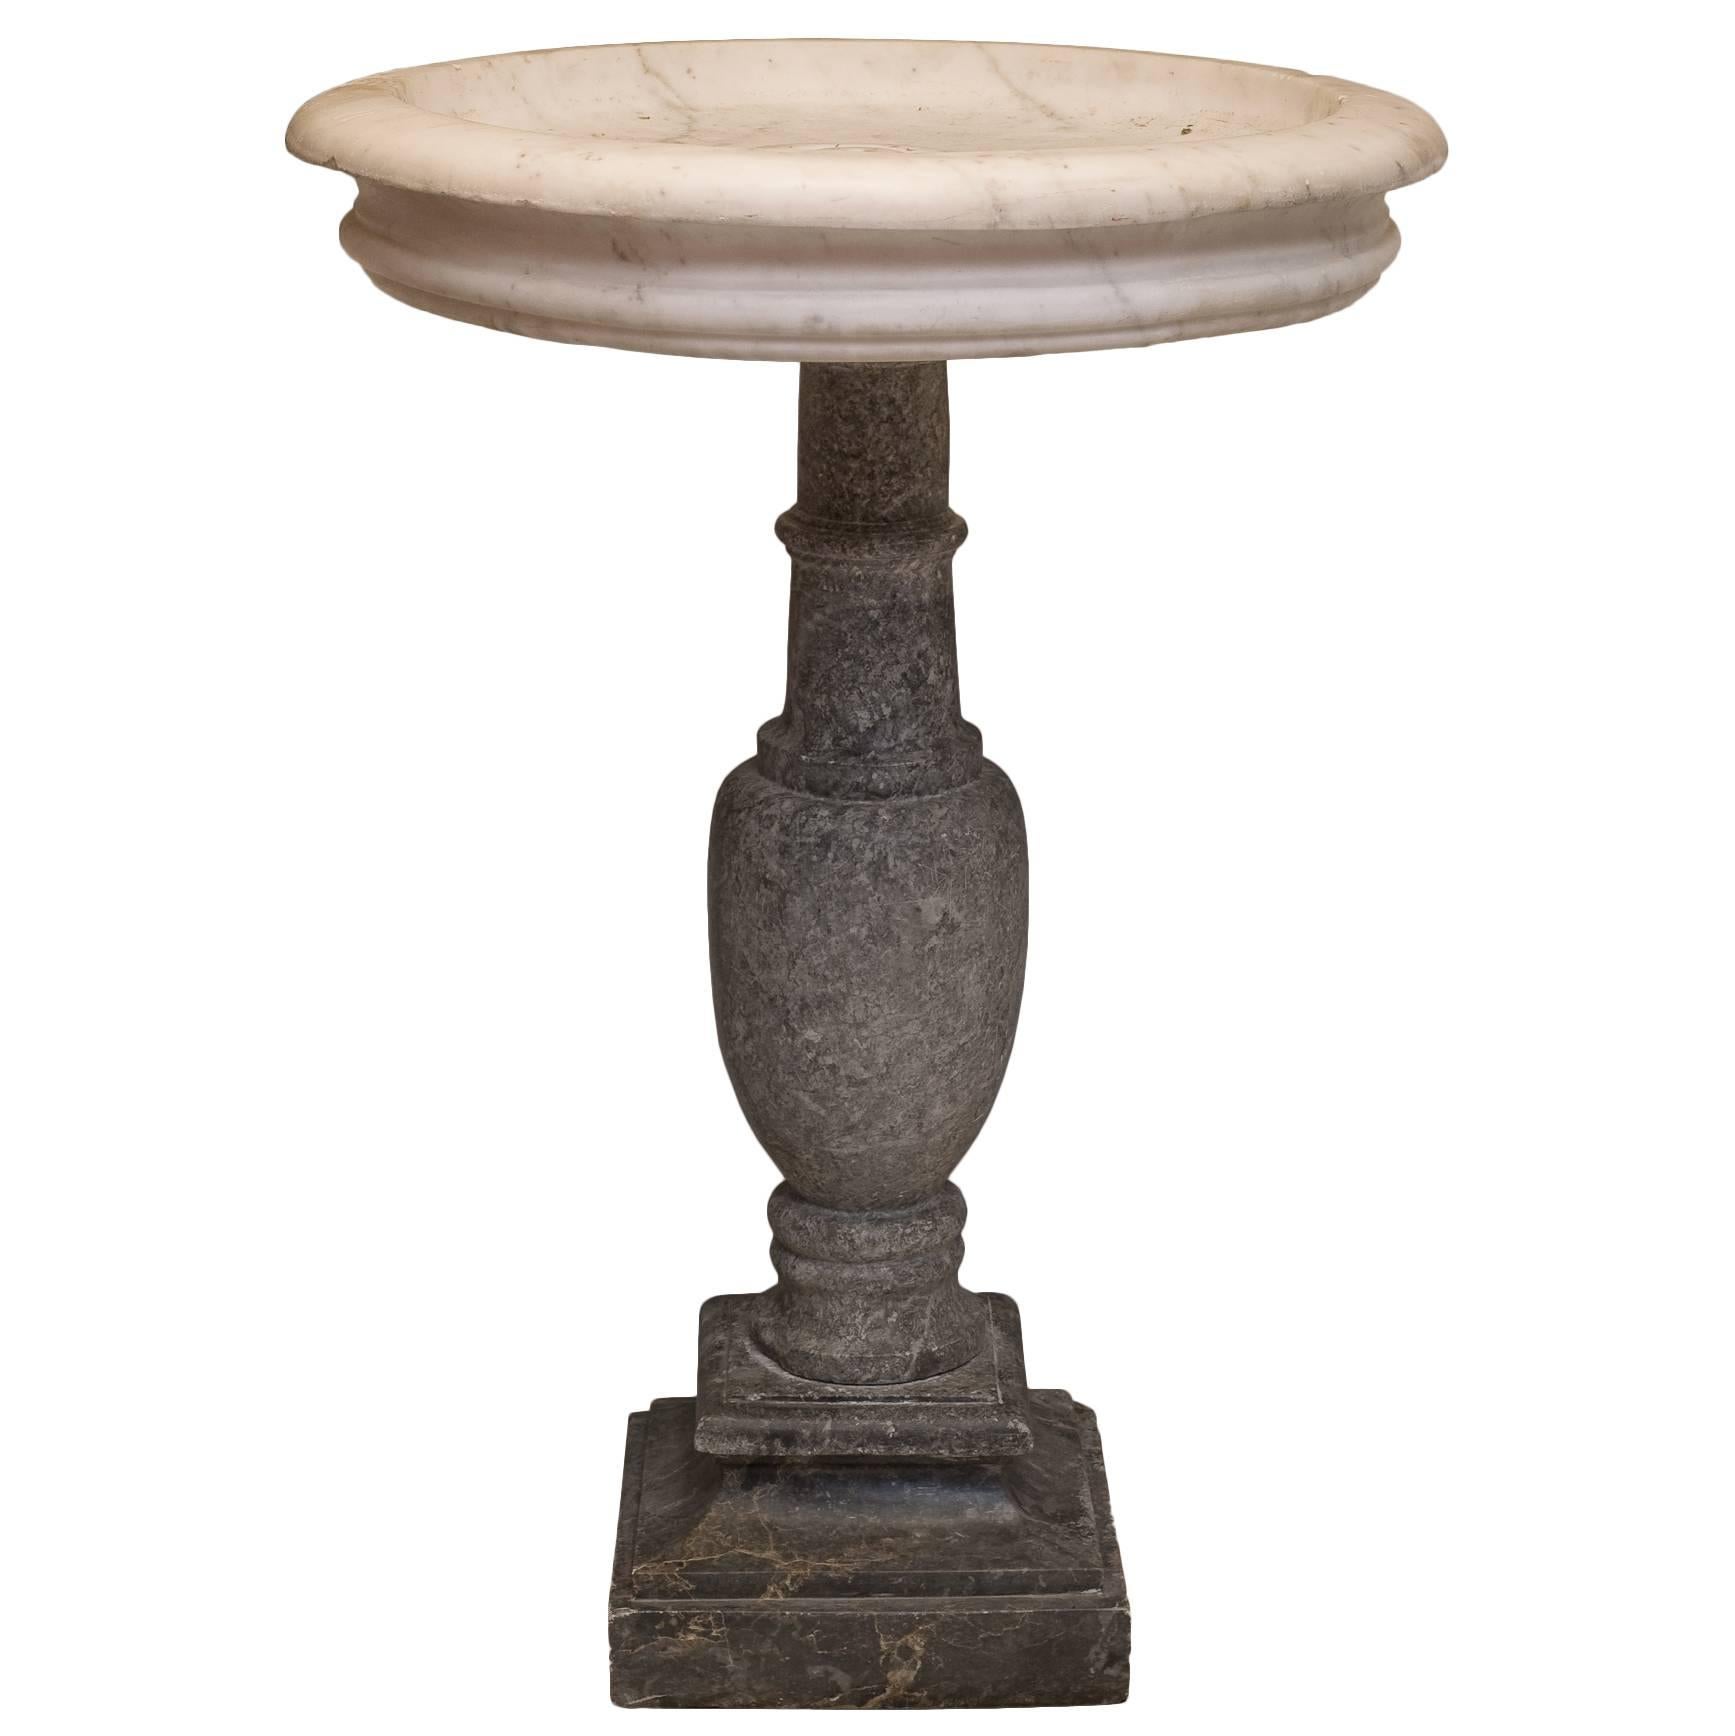 White and Grey Marble Fountaine, Late 17th Century For Sale